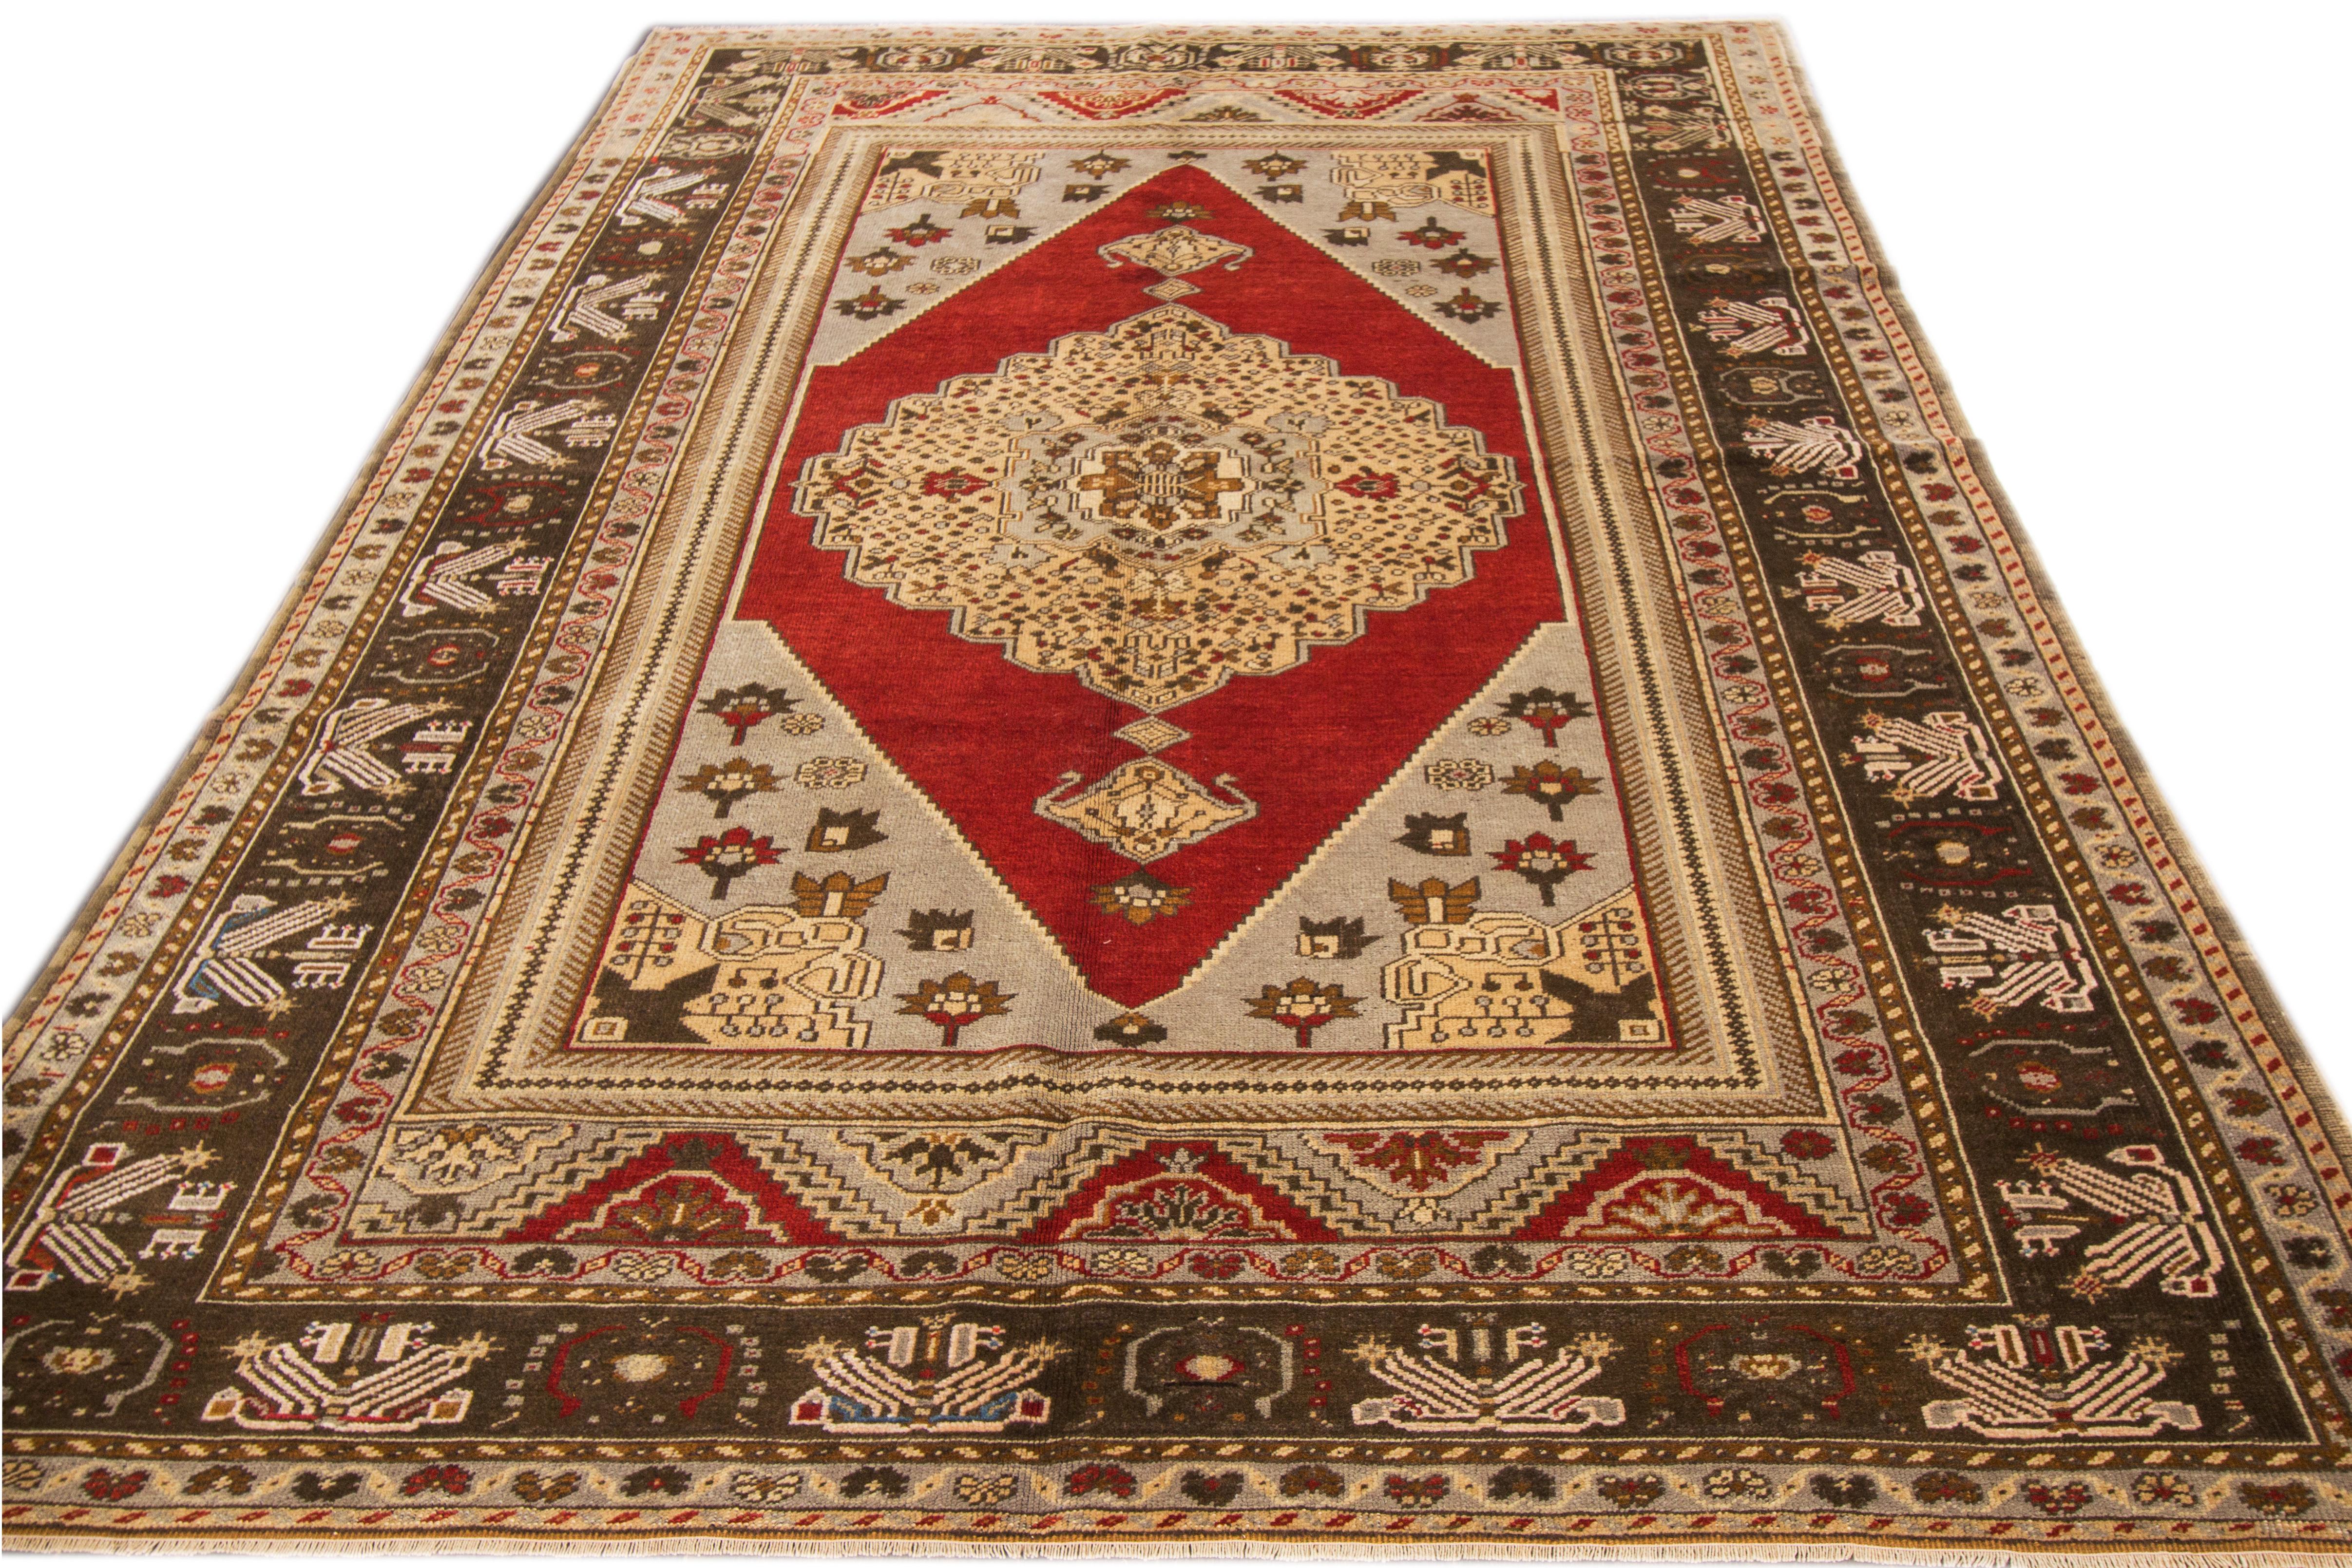 1920s Antique Khotan Rug In Good Condition For Sale In Norwalk, CT